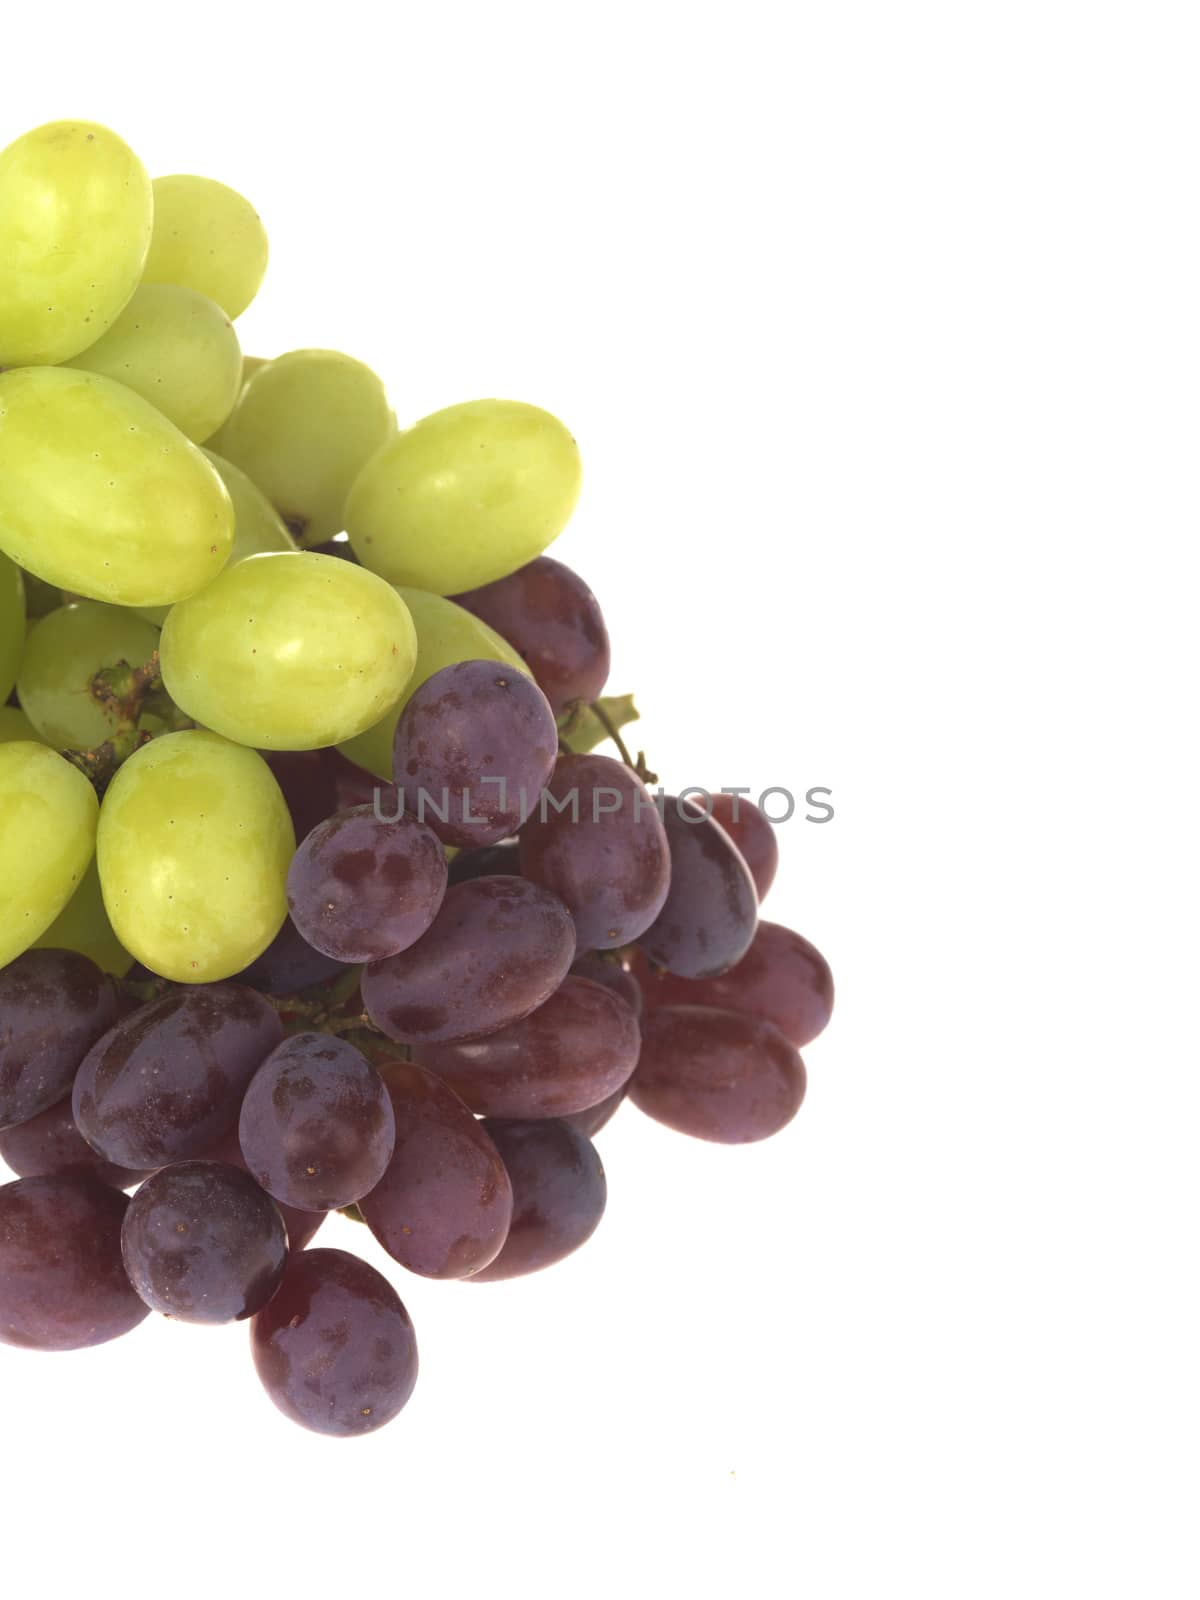 Bunch of Green and Red Grapes by Whiteboxmedia